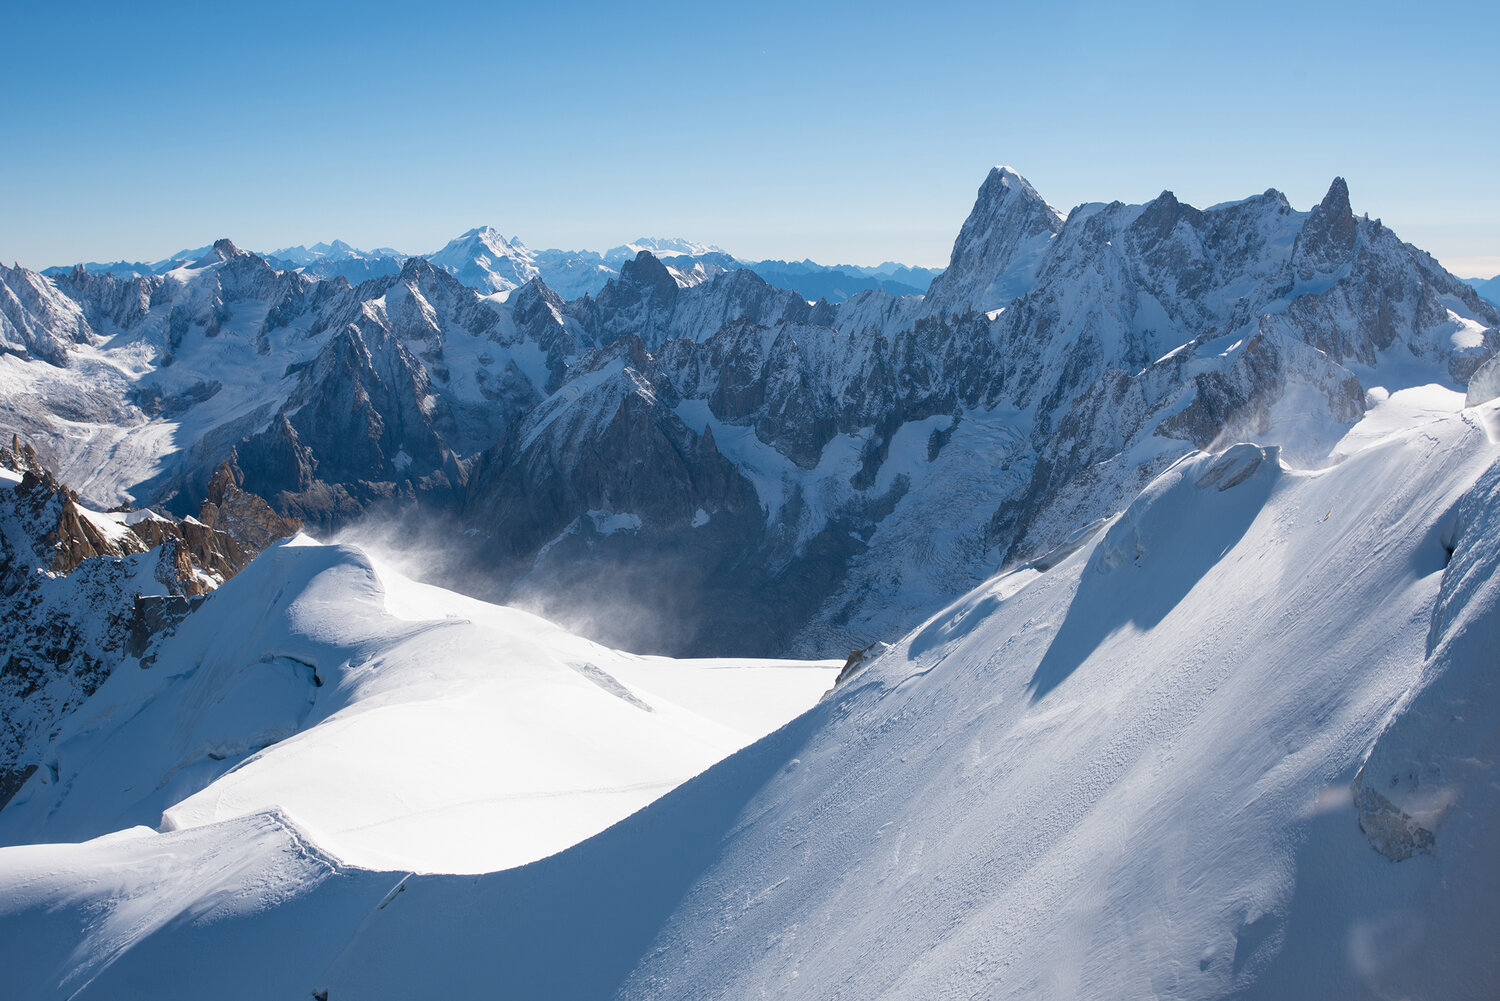 Luxury Chamonix Ski Snowboard Tour Fully Custom French Alps Skiing With Luxury Chalets The Cat The Peacock Distinctive Travel For Curious People